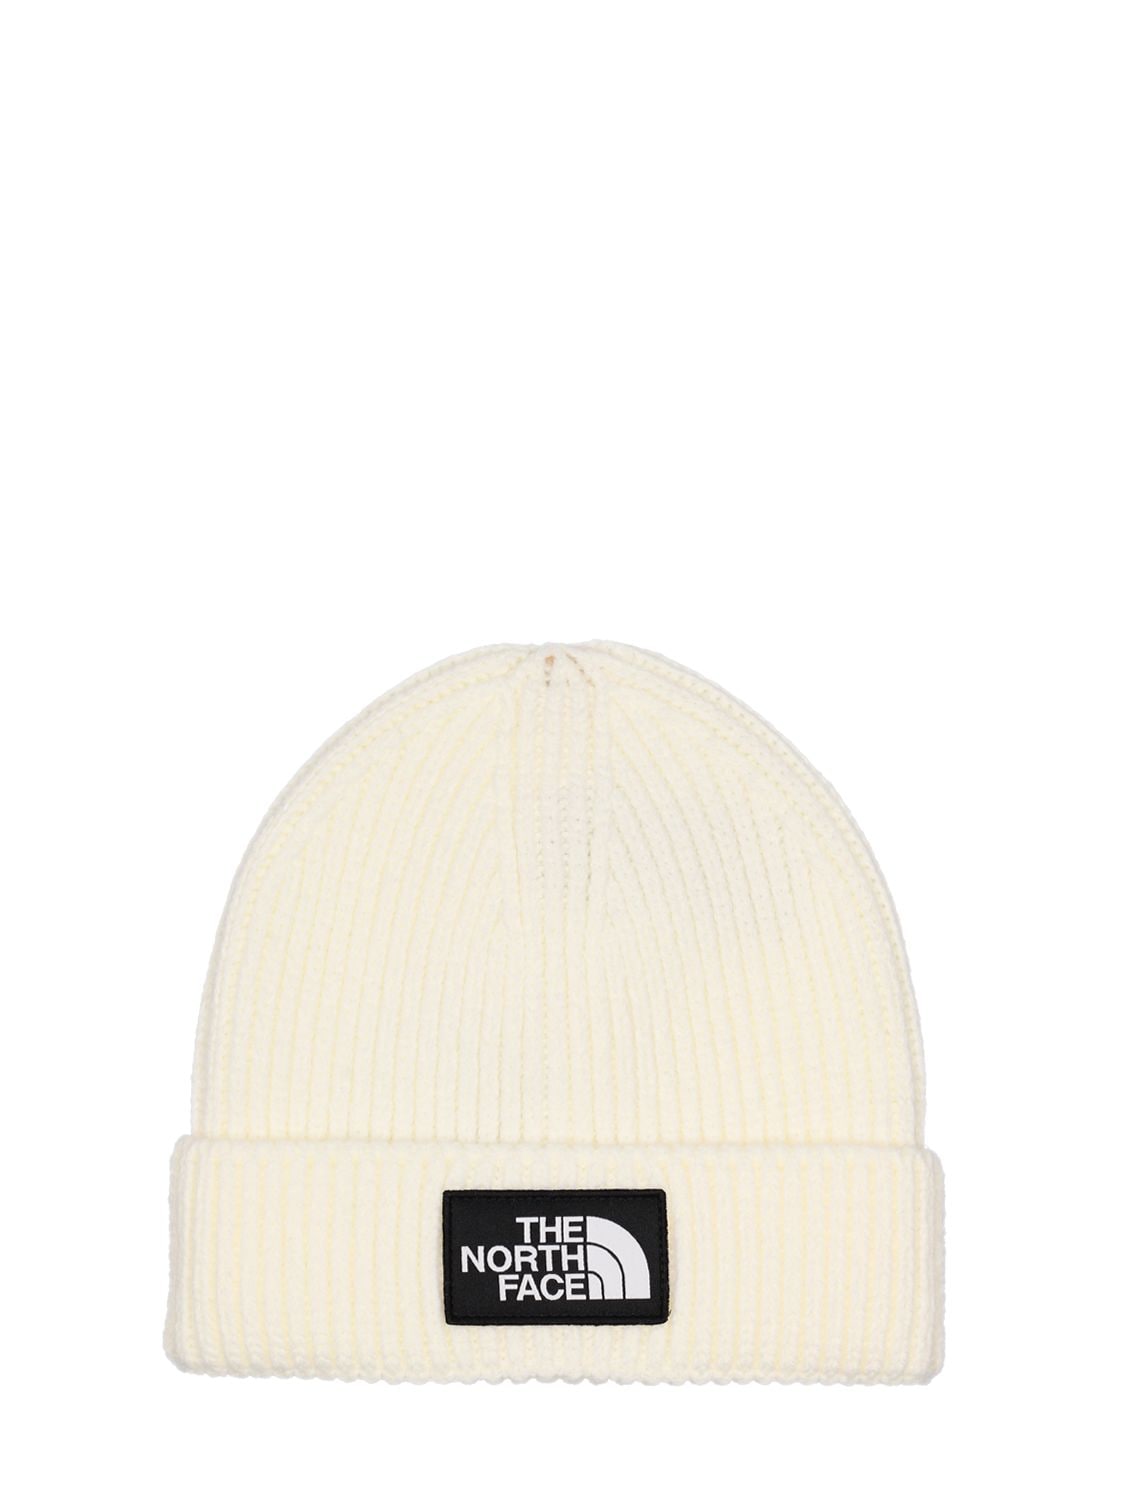 THE NORTH FACE LOGO ACRYLIC BLEND KNIT BEANIE